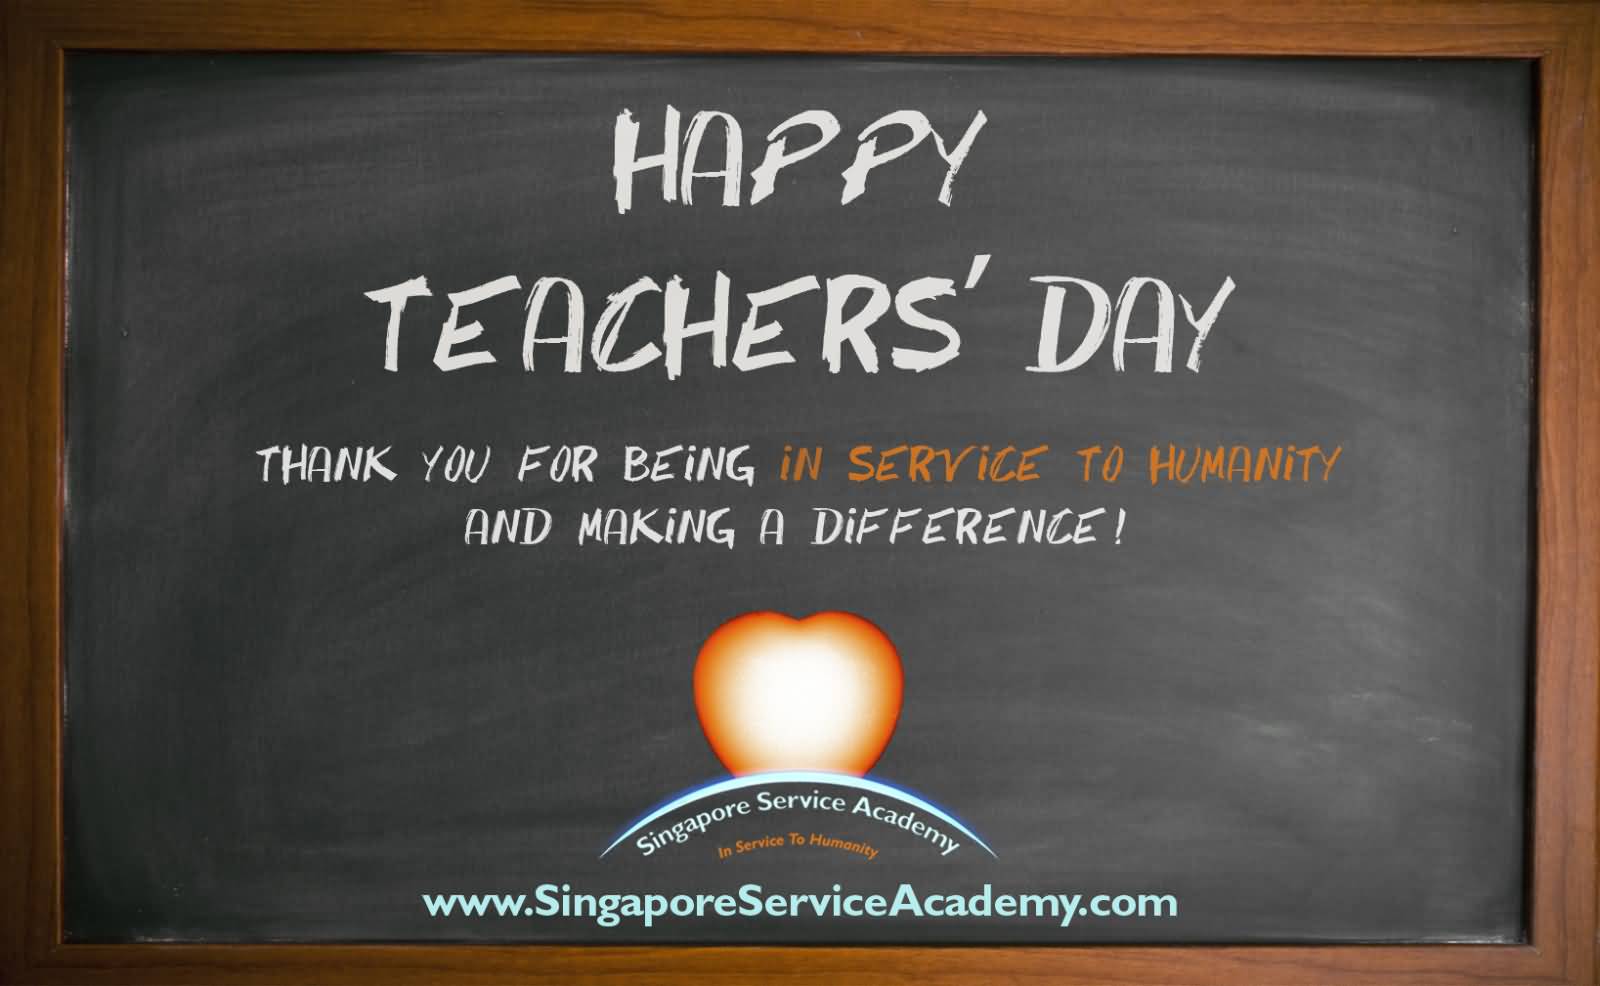 Happy World Teachers Day 2016 Thank You For Being In Service To Humanity And Making A Difference